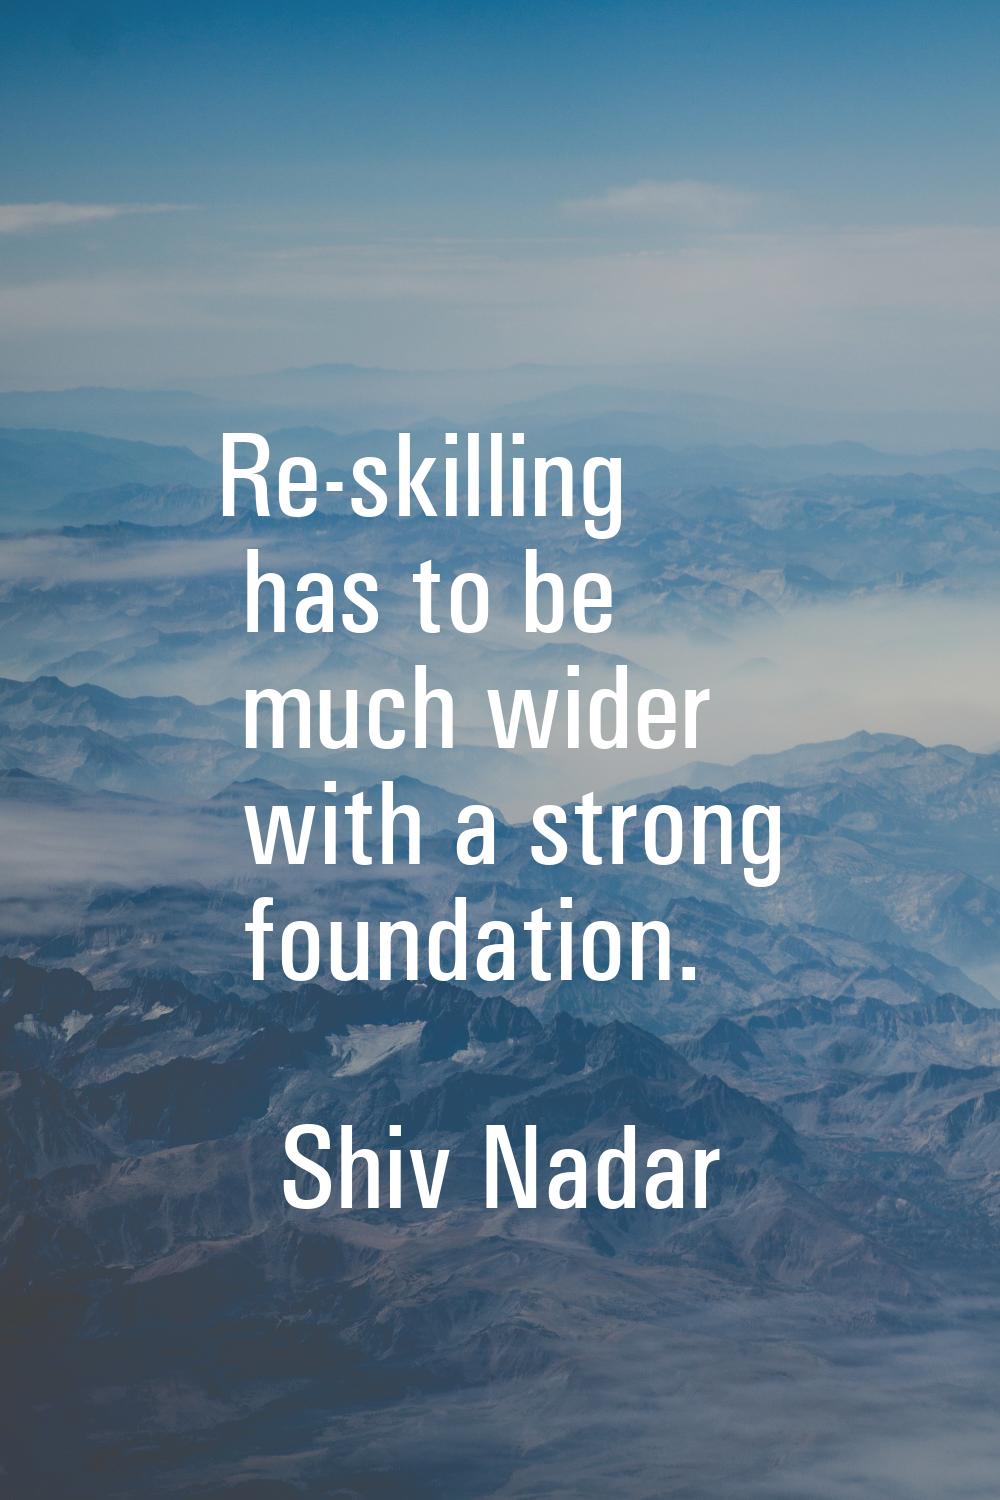 Re-skilling has to be much wider with a strong foundation.